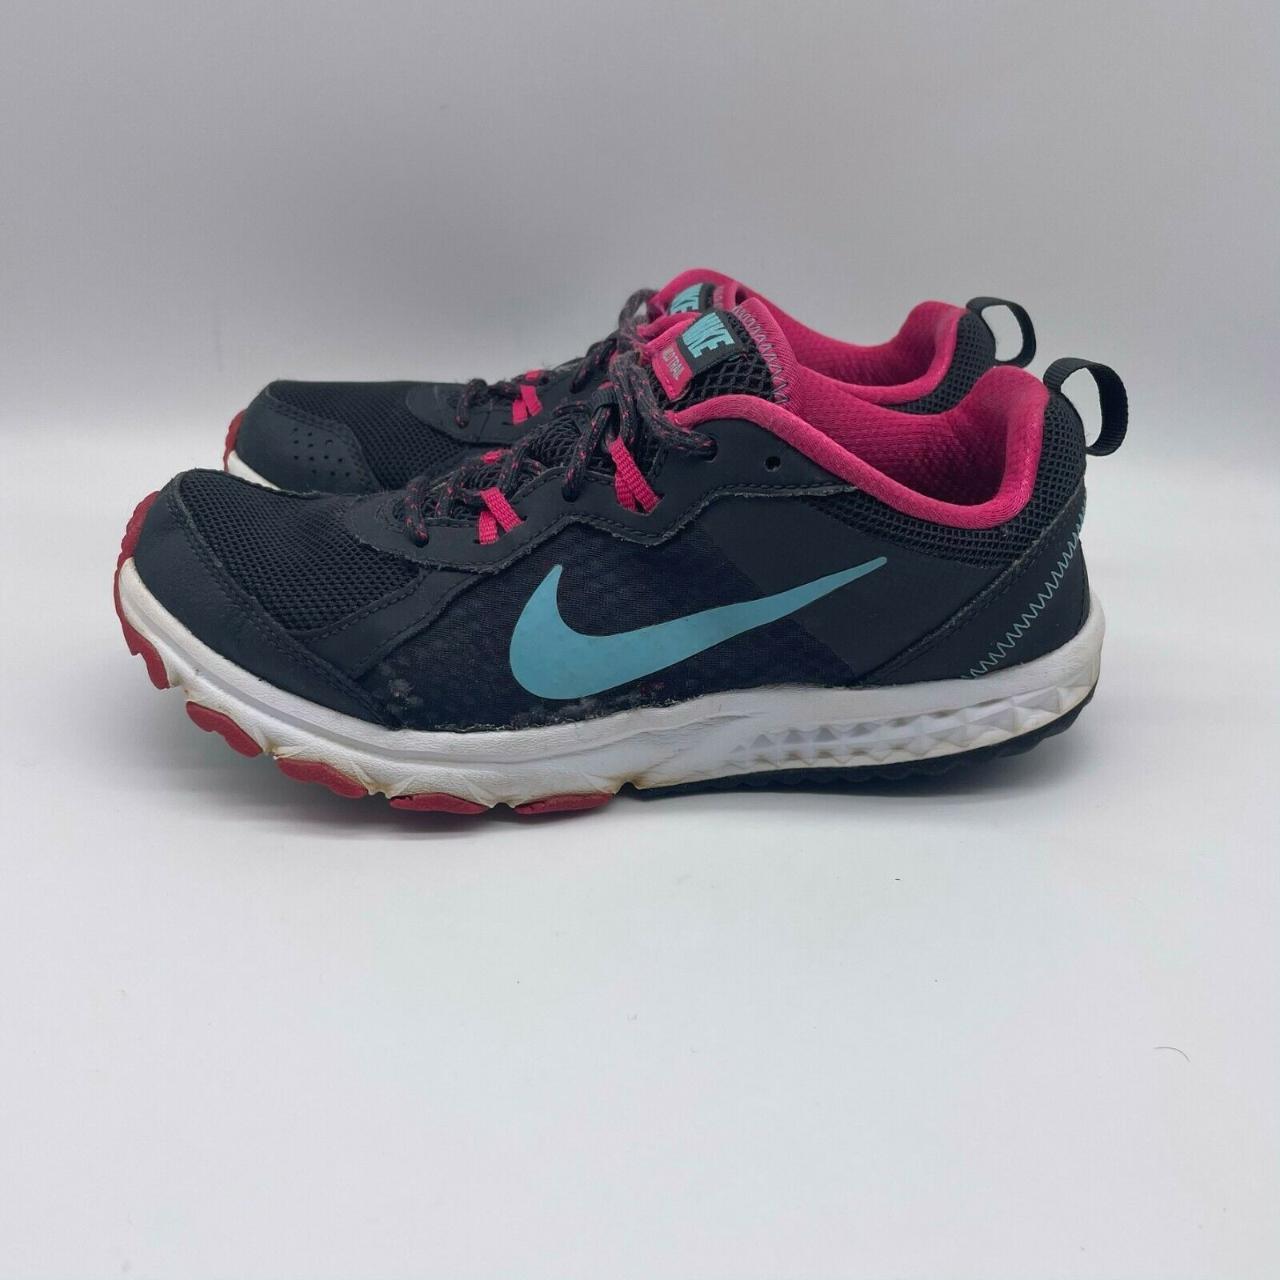 Nike Women's Black and Pink Trainers